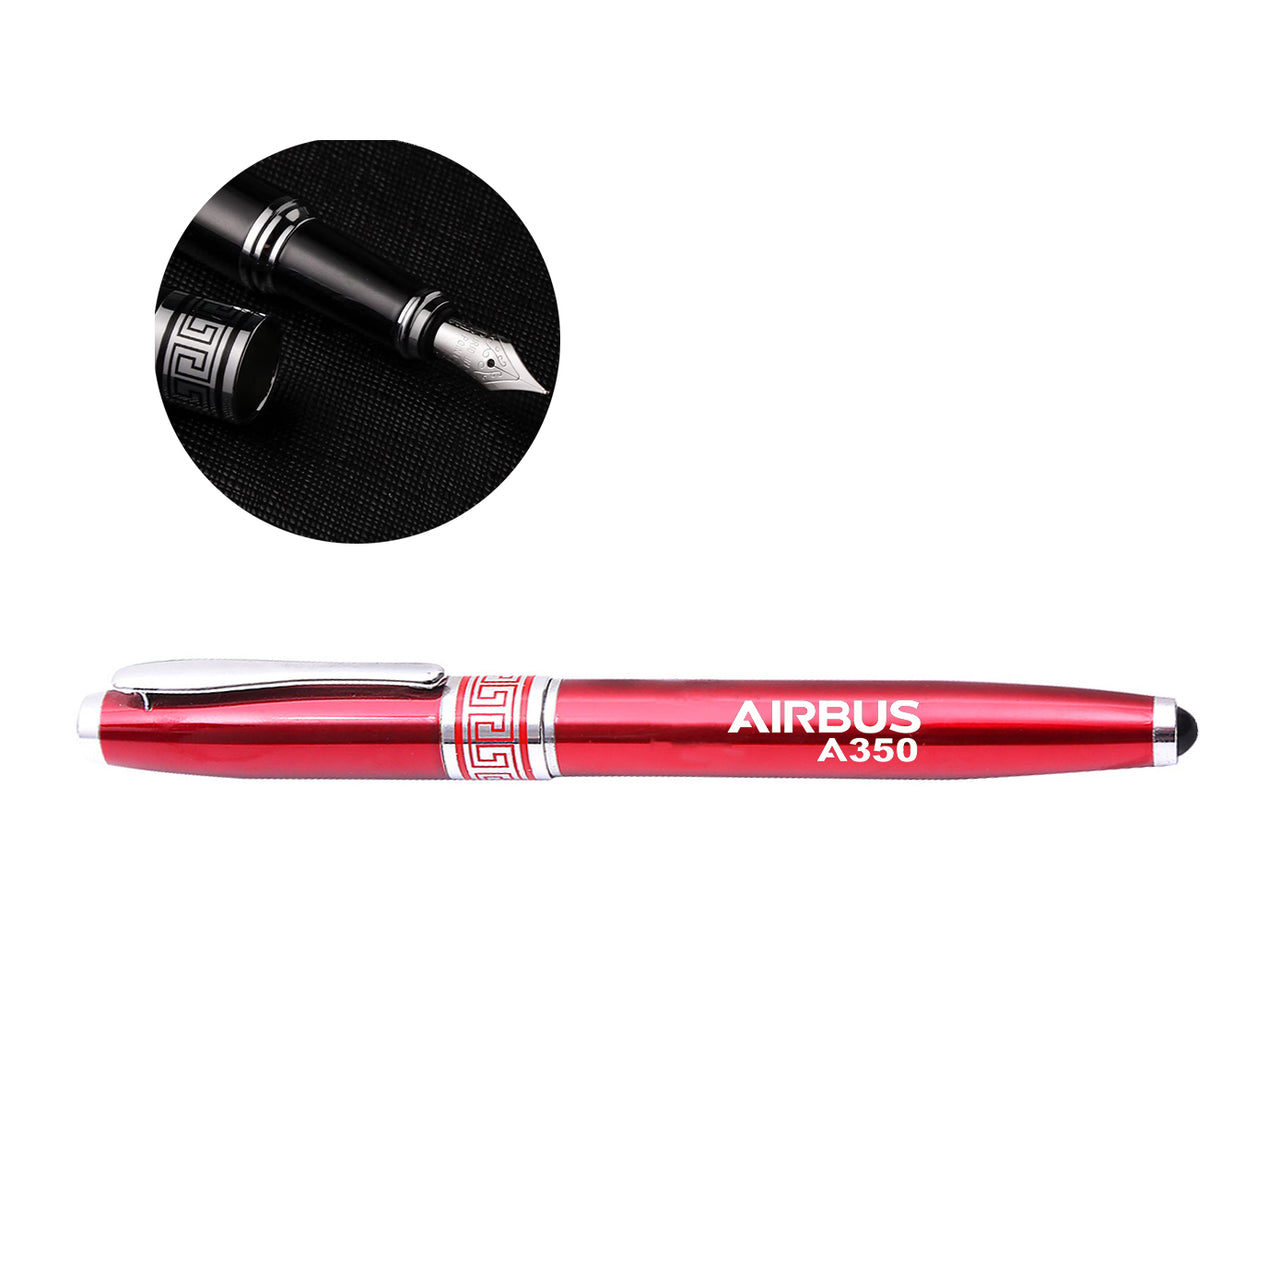 Airbus A350 & Text Designed Pens